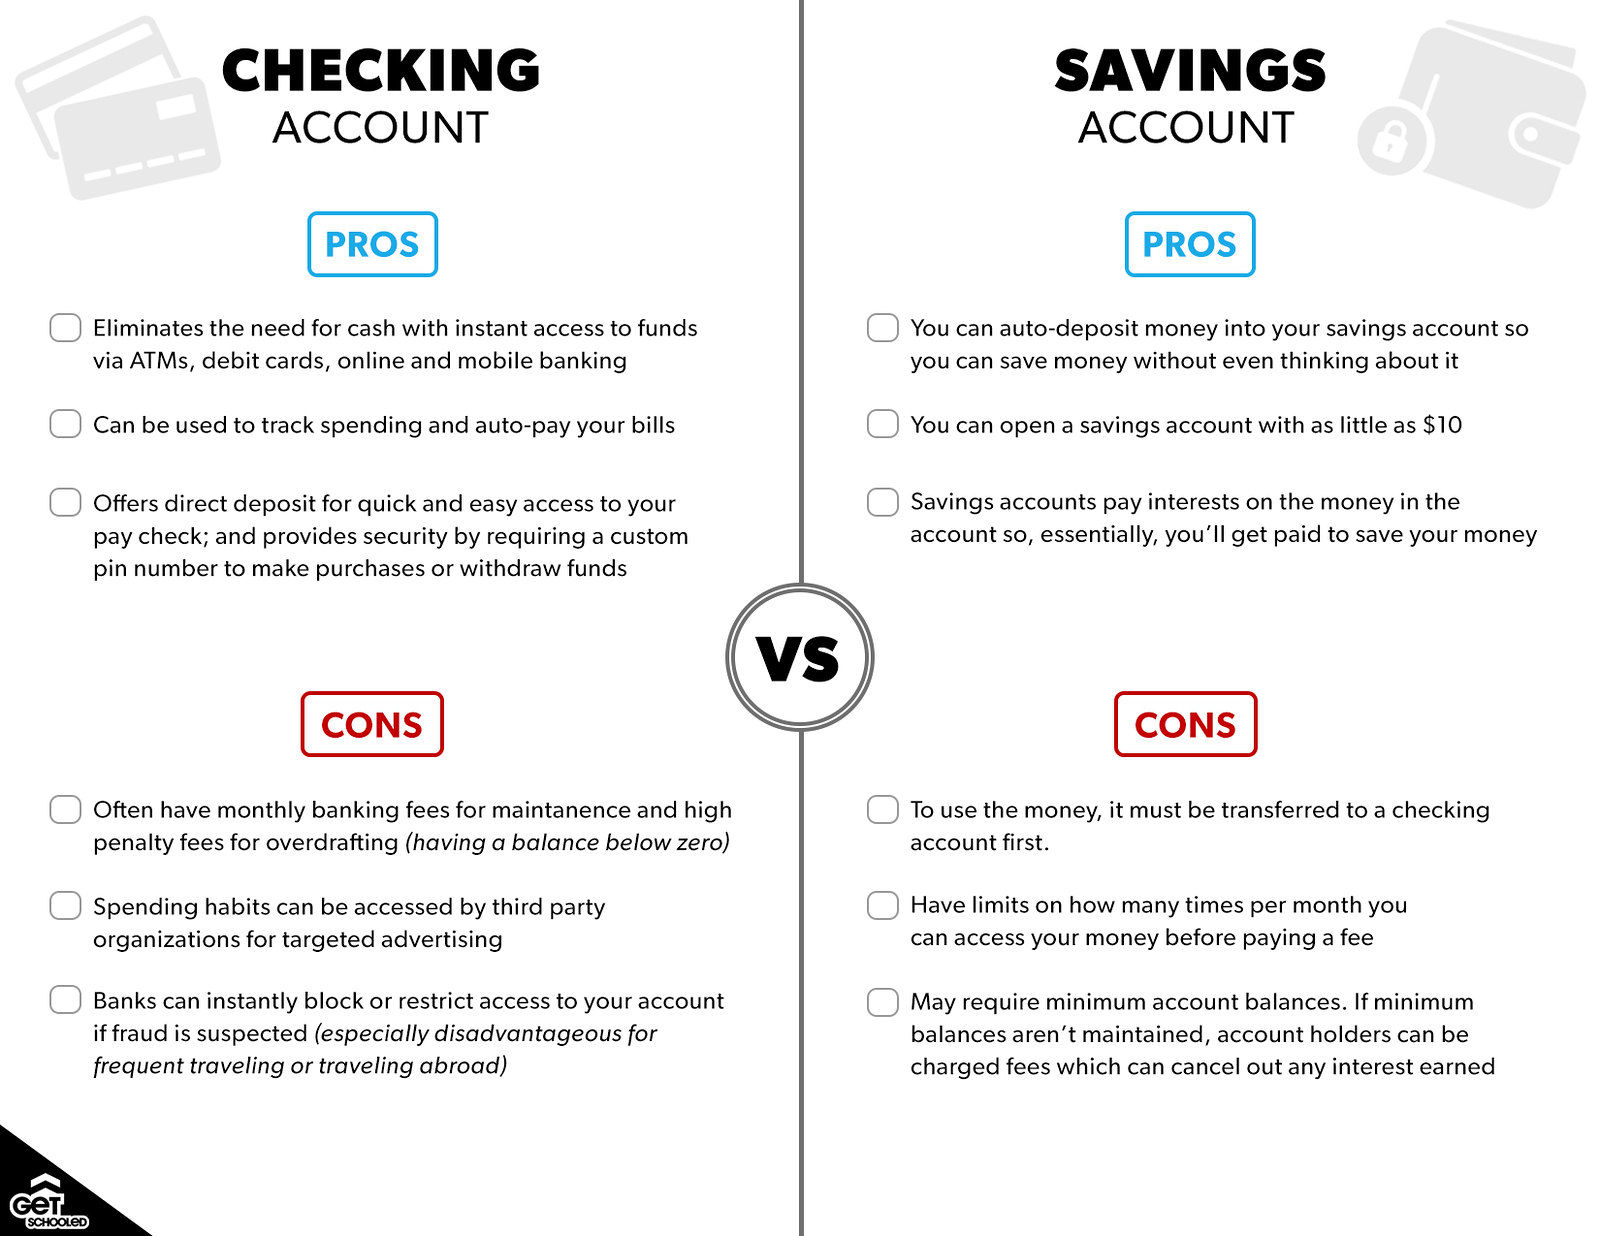 Infographic identifying the differences between a checking and savings account, and the pros and cons for both.